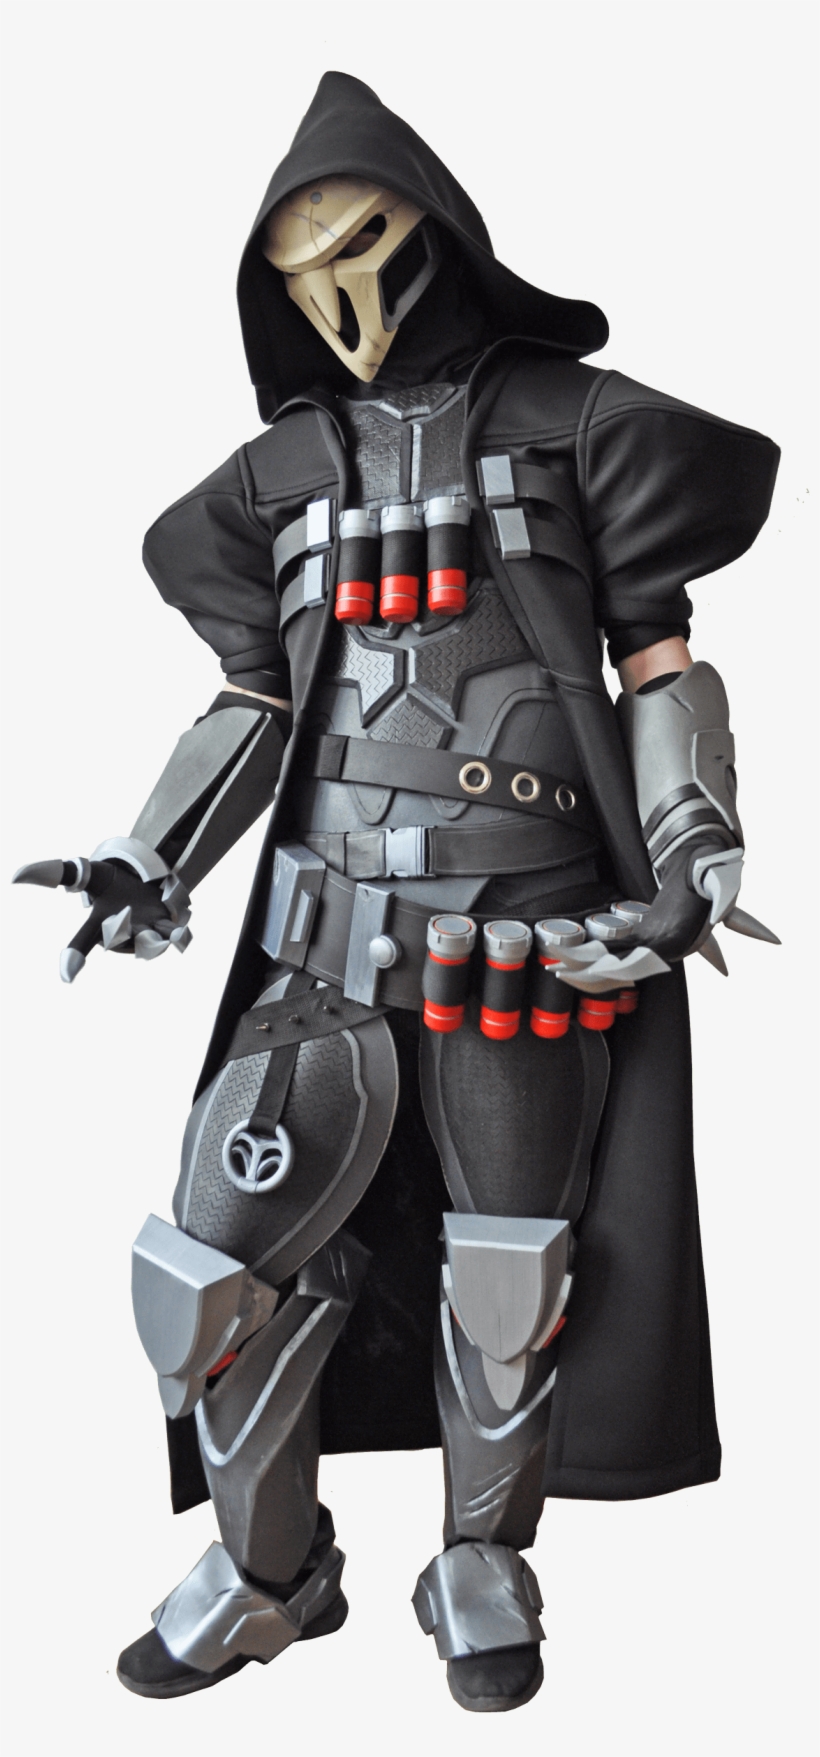 Overwatch Reaper Costume Overwatch Reaper Costume For Sale